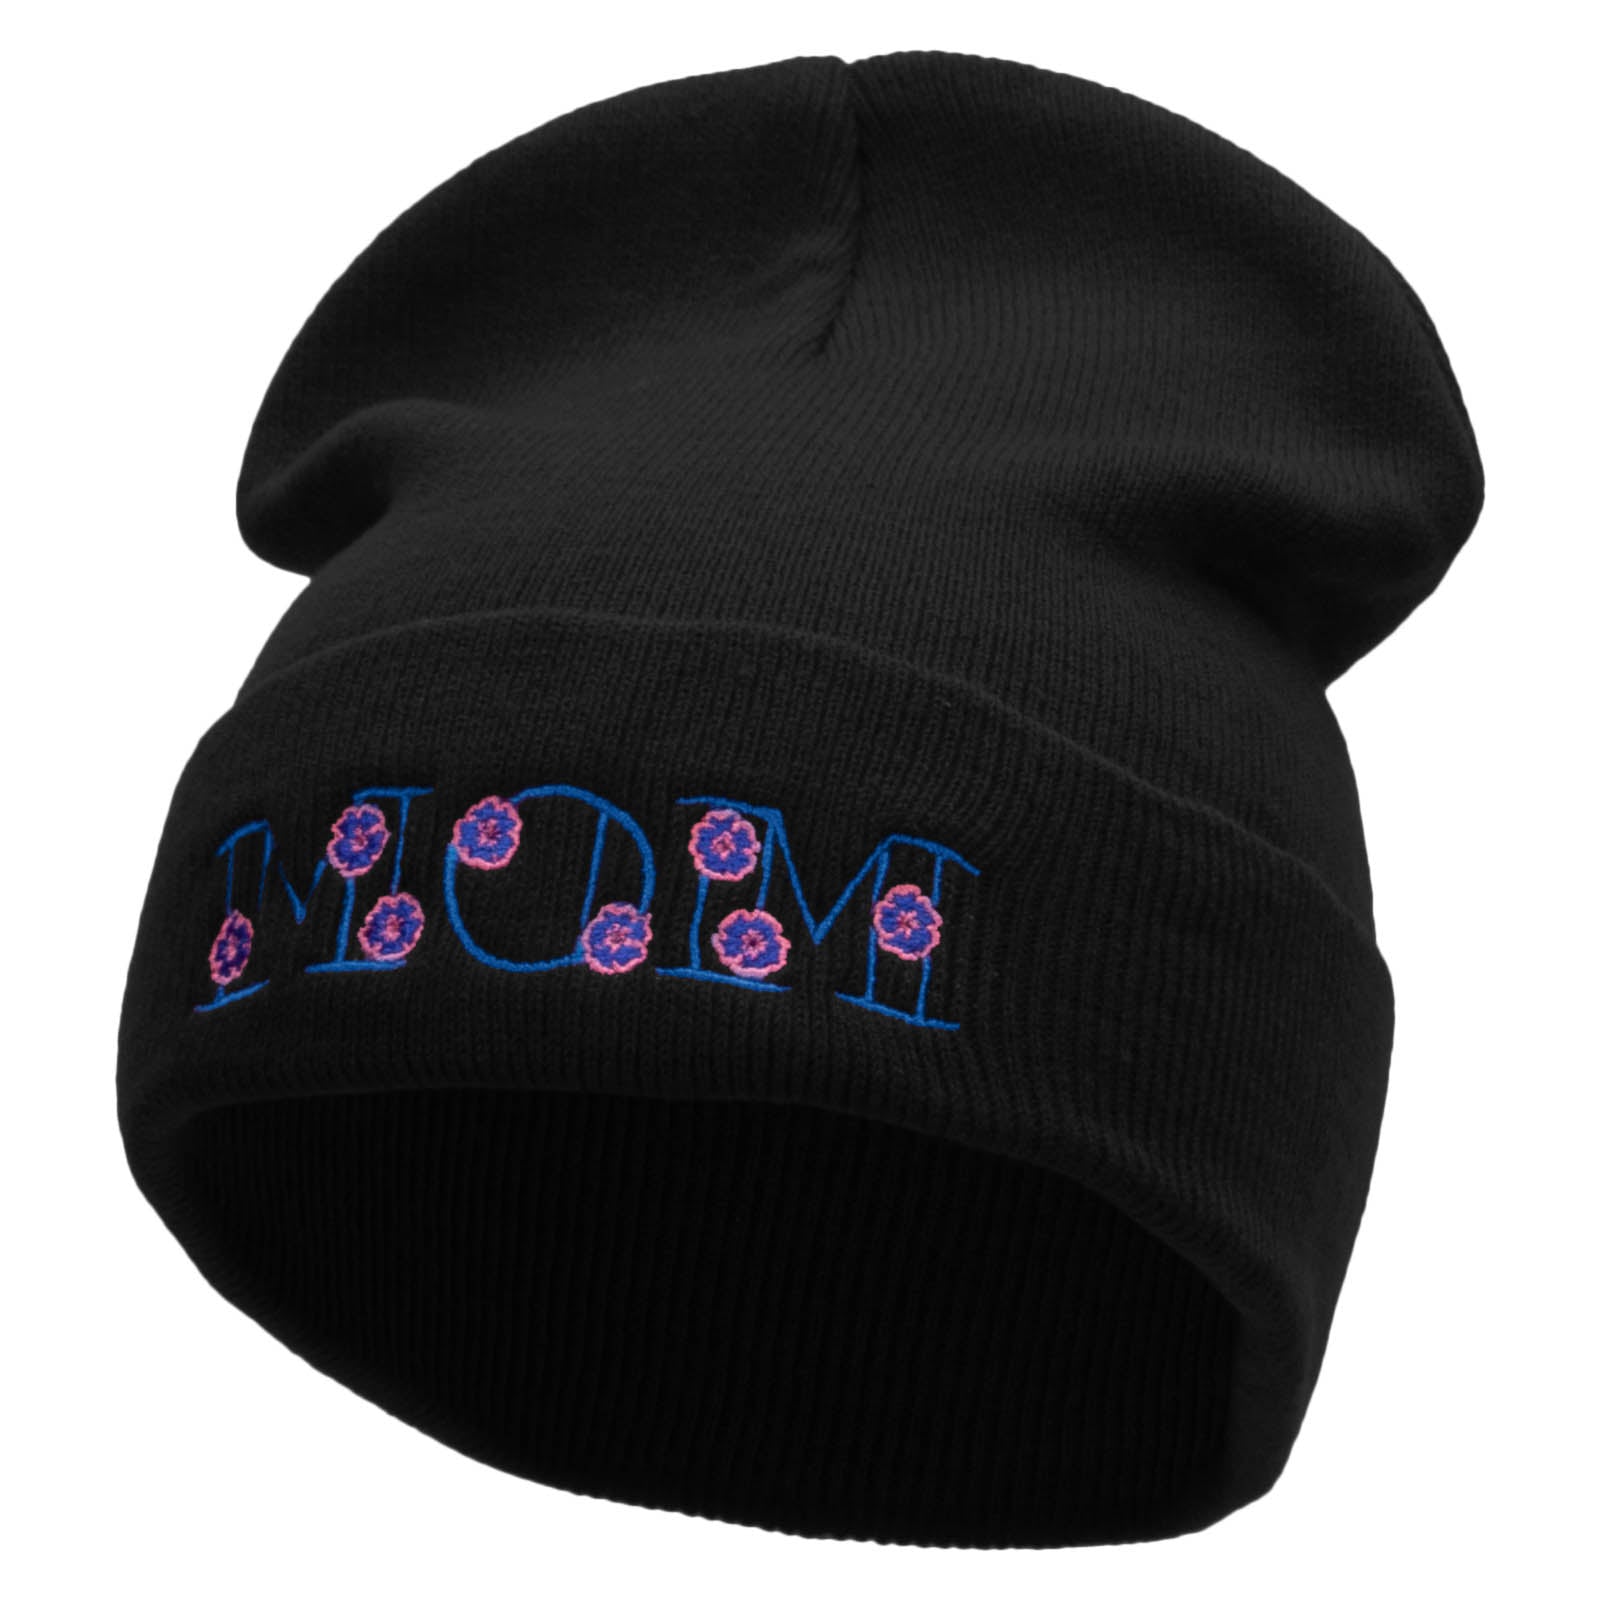 Floral Mom Embroidered 12 Inch Long Knitted Beanie - Black OSFM